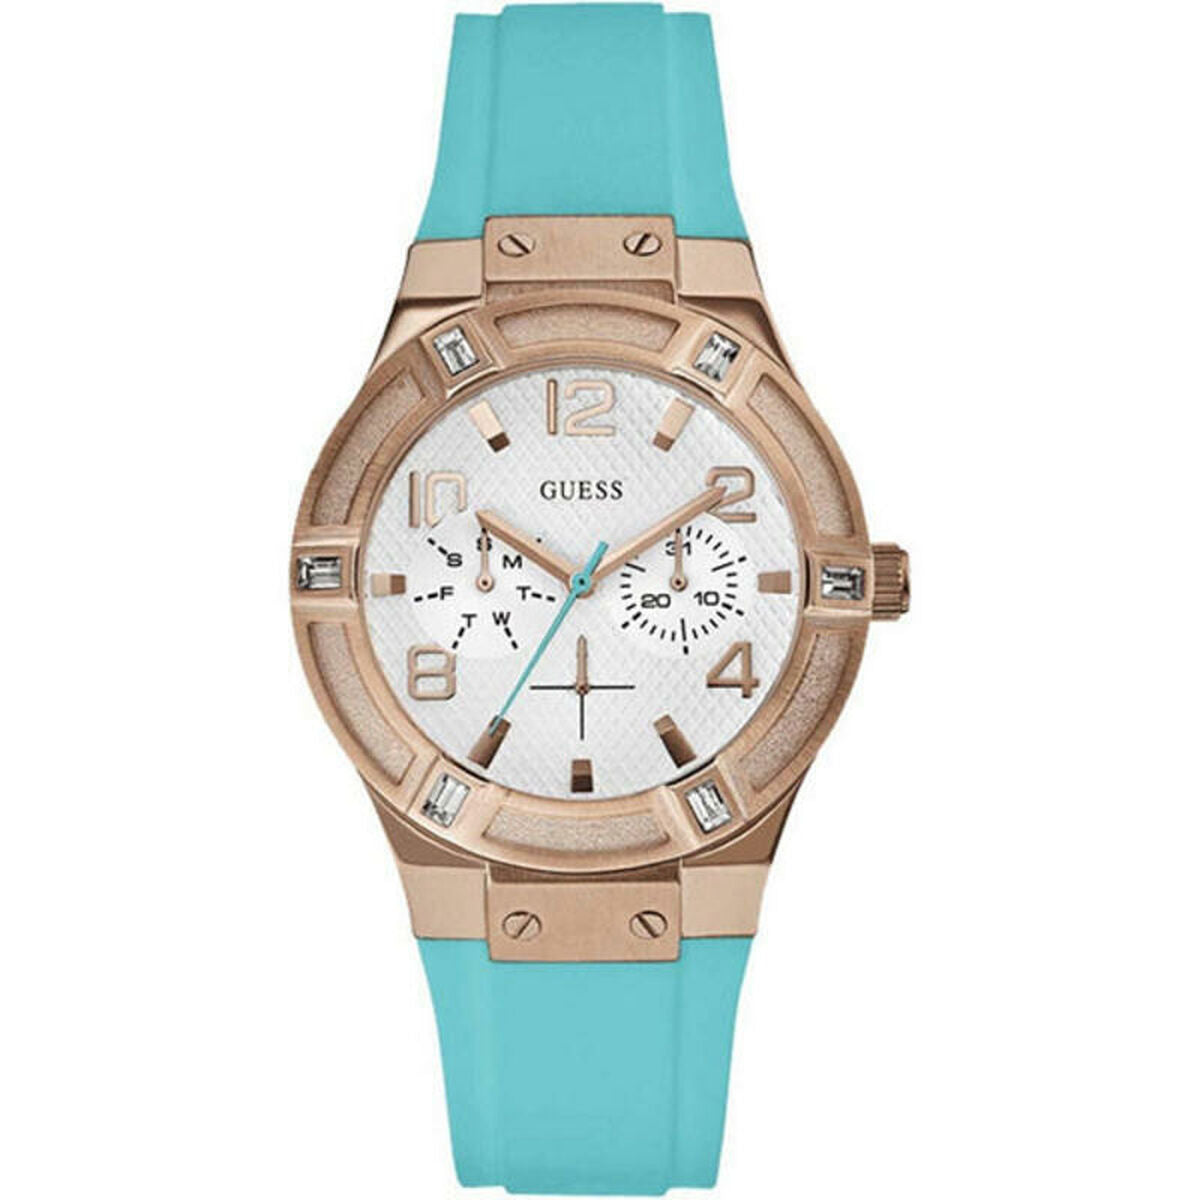 Ladies'Watch Guess W0564L3 (Ø 39 mm), Guess, Watches, Women, ladieswatch-guess-w0564l3-o-39-mm, : Quartz Movement, :Blue, :Gold, :Silver, Brand_Guess, category-reference-2570, category-reference-2635, category-reference-2995, category-reference-t-19667, category-reference-t-19725, Condition_NEW, fashion, gifts for women, original gifts, Price_100 - 200, RiotNook